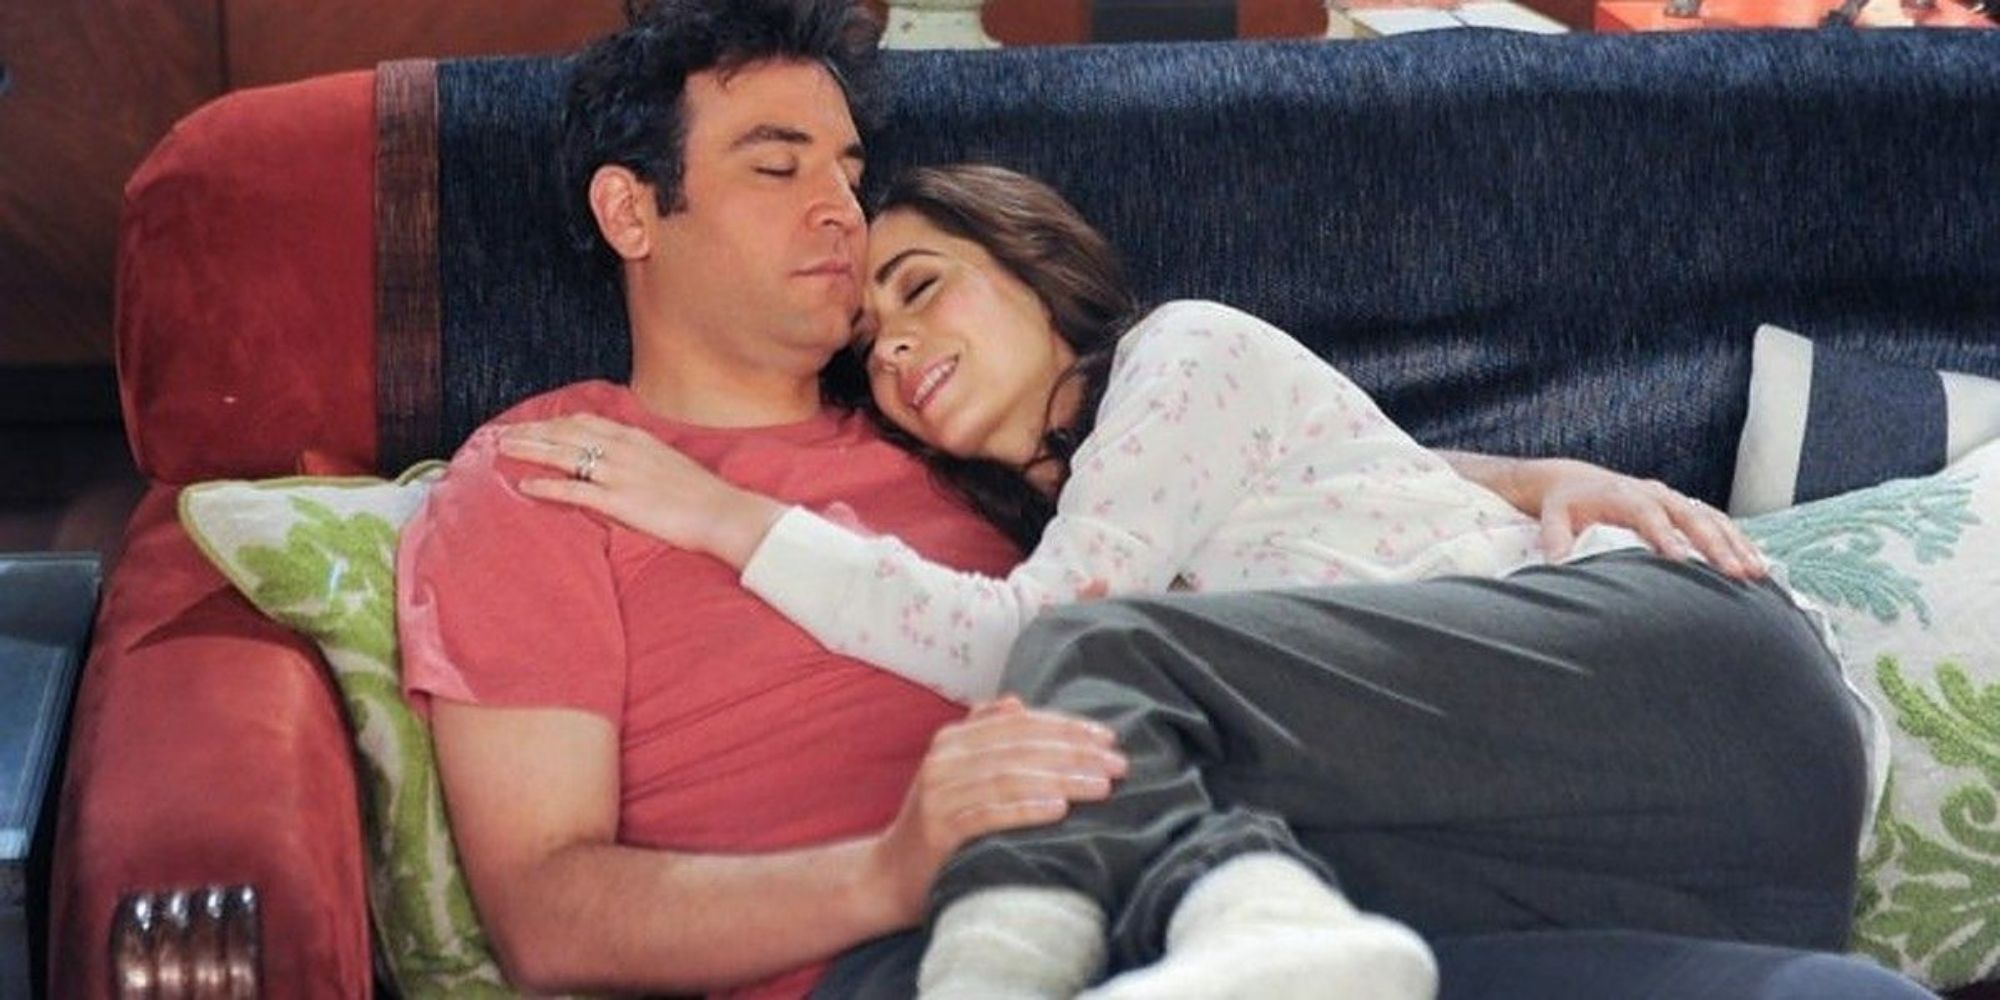 Josh Radnor as Ted and Cristin Milioti as Tracy cuddling on the couch in How I Met Your Mother